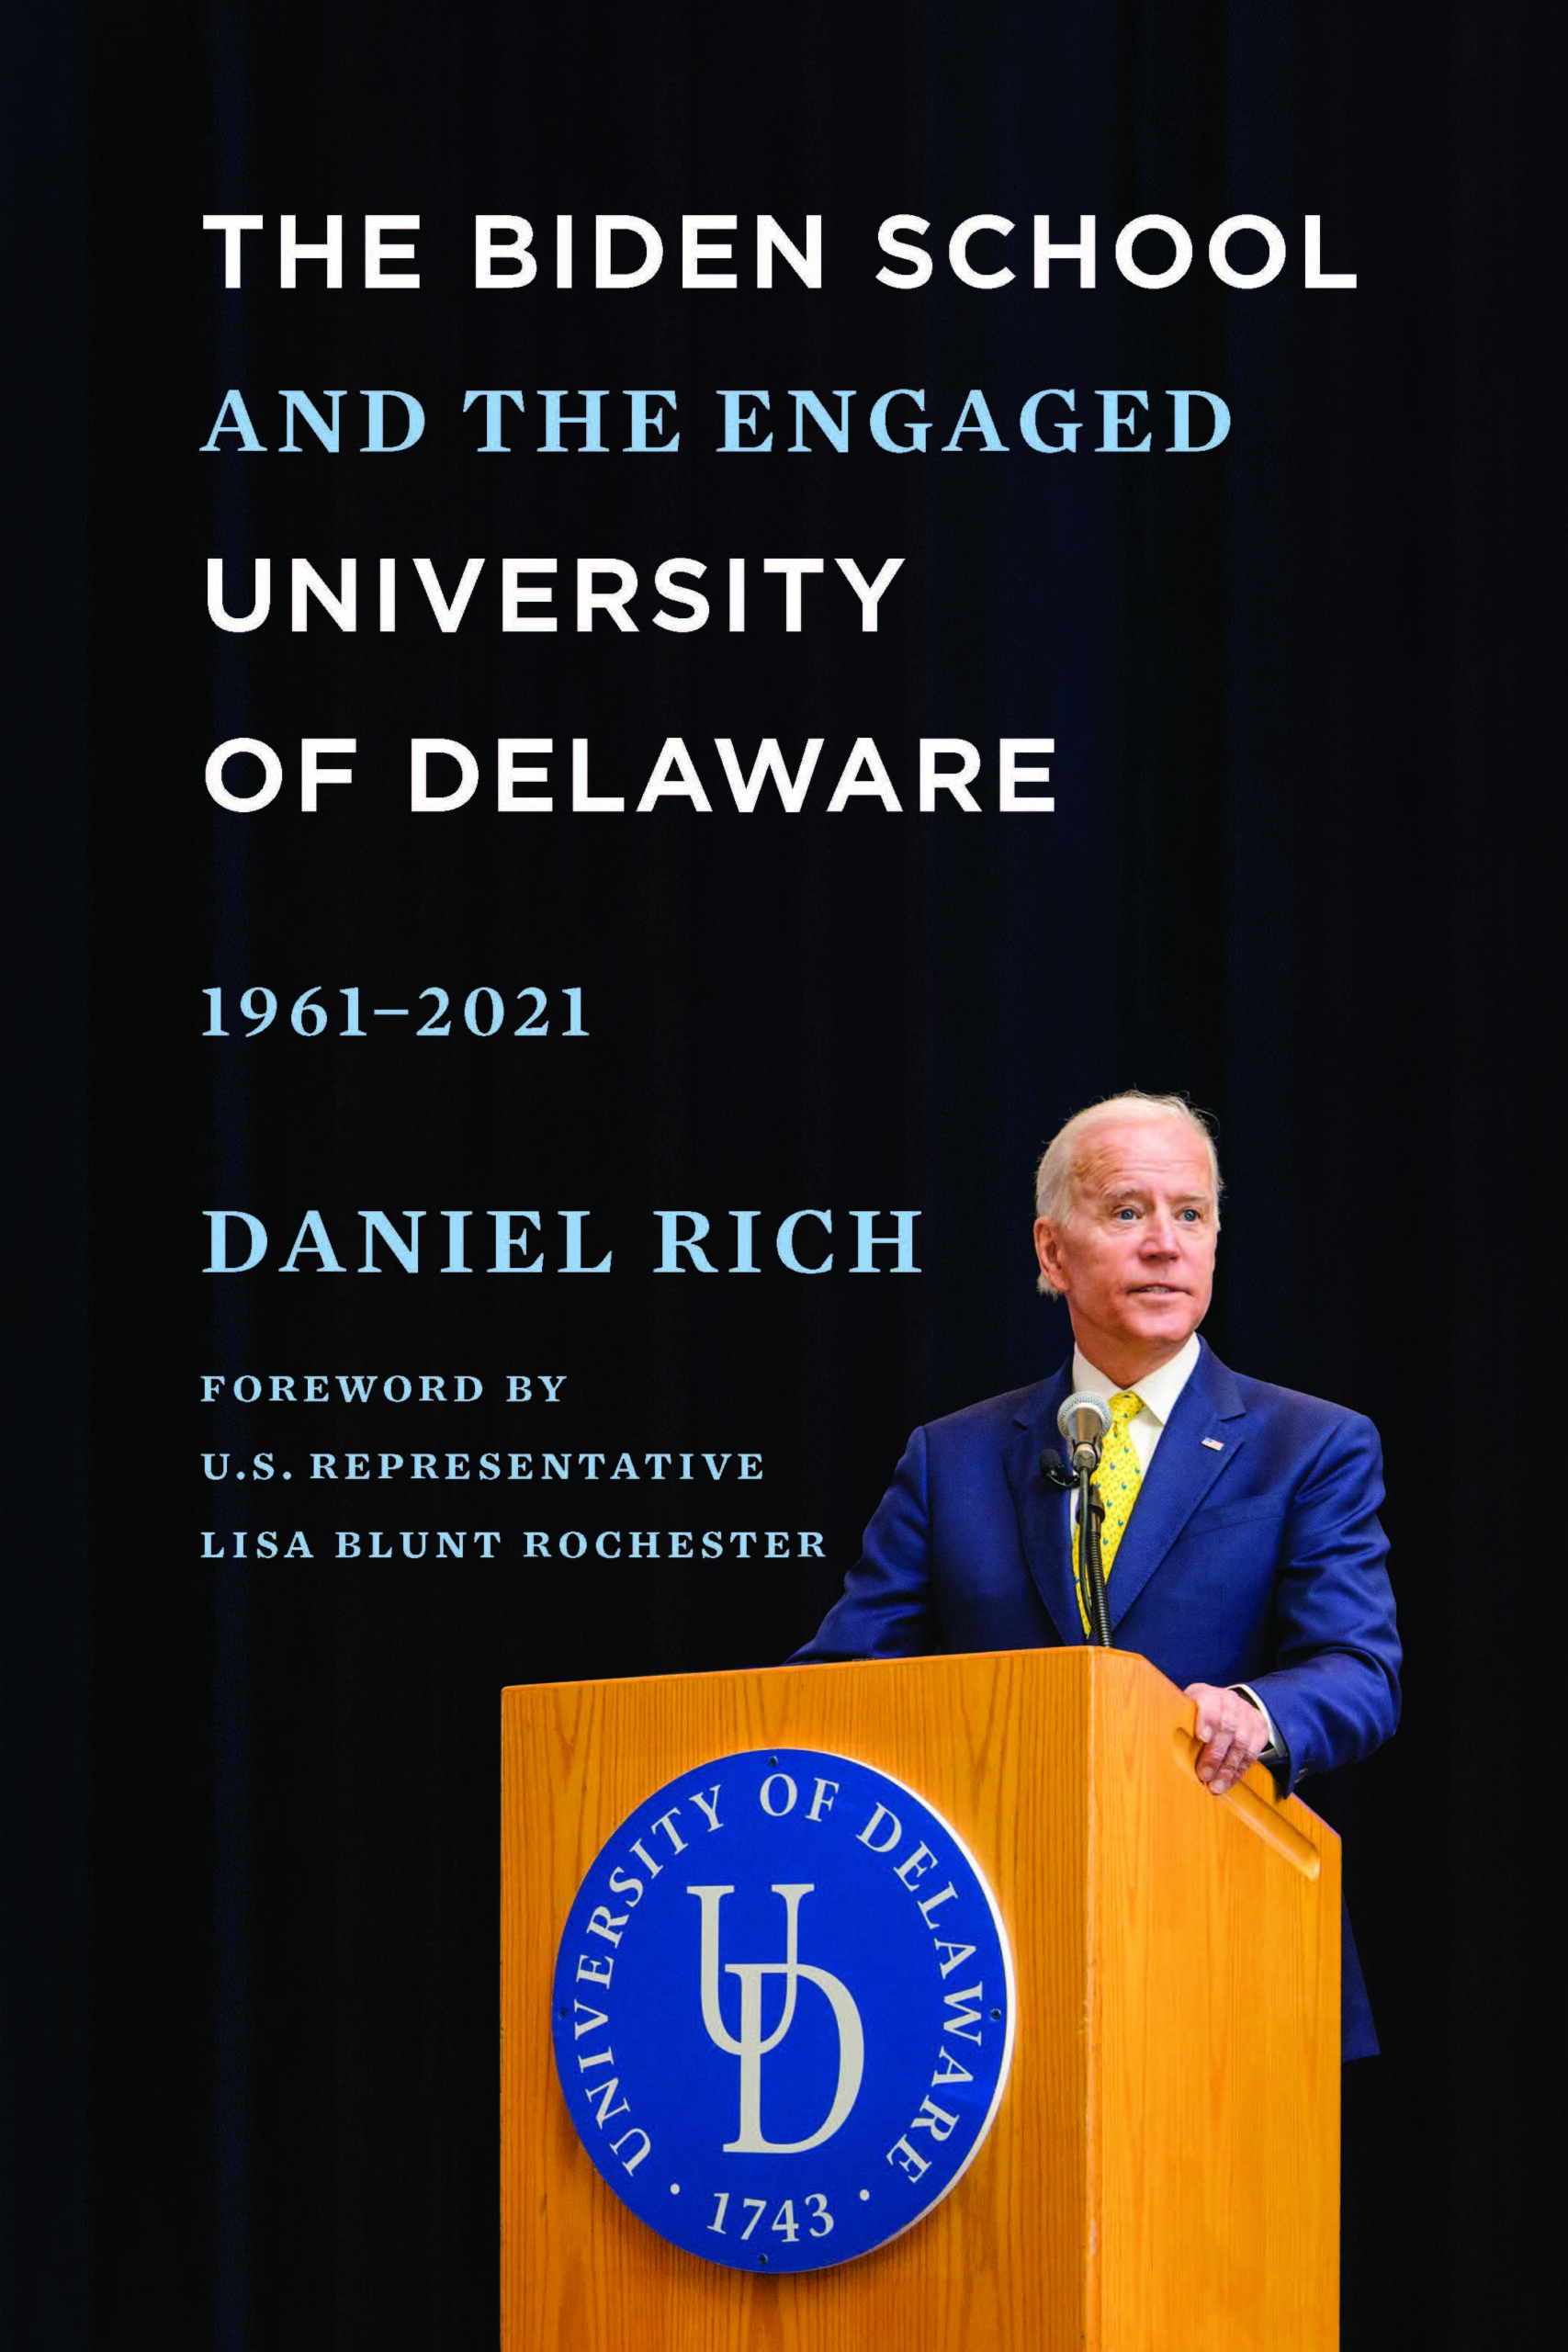 The Biden School and the Engaged University of Delaware by Daniel Rich